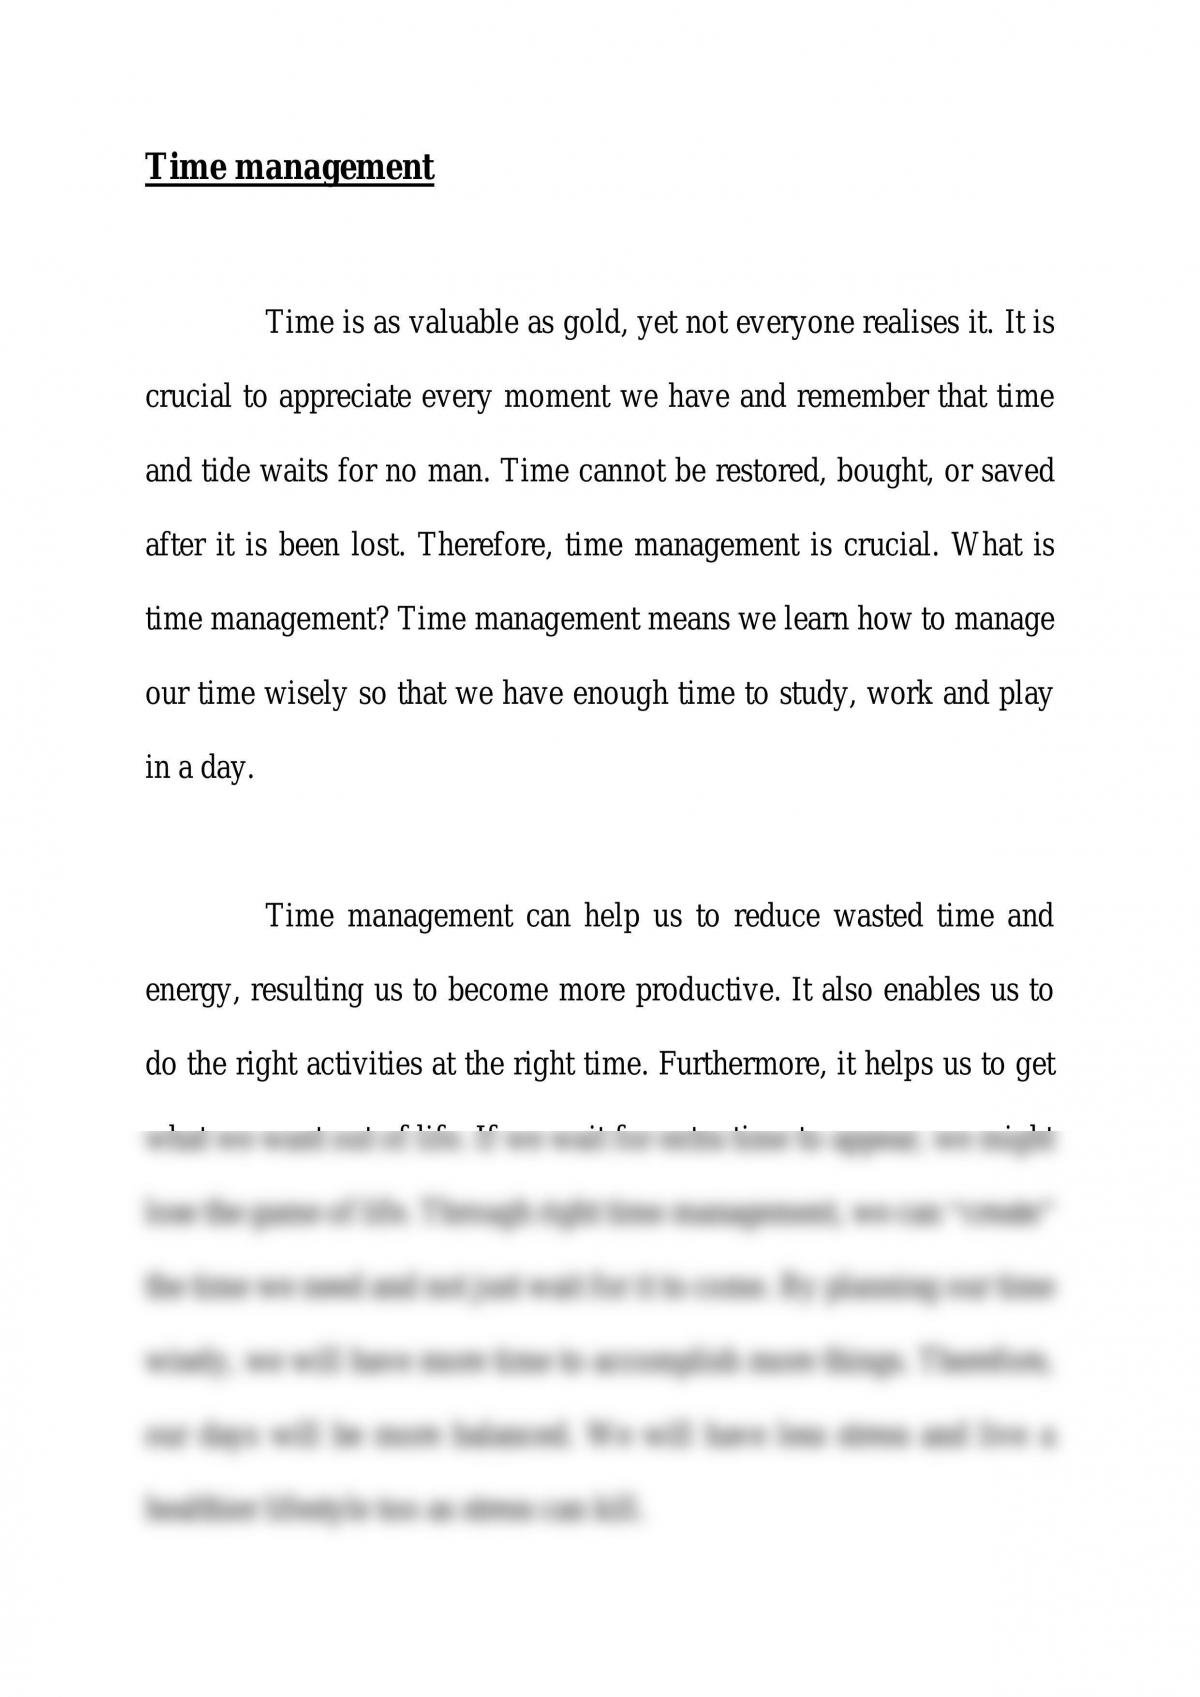 800 word essay on time management